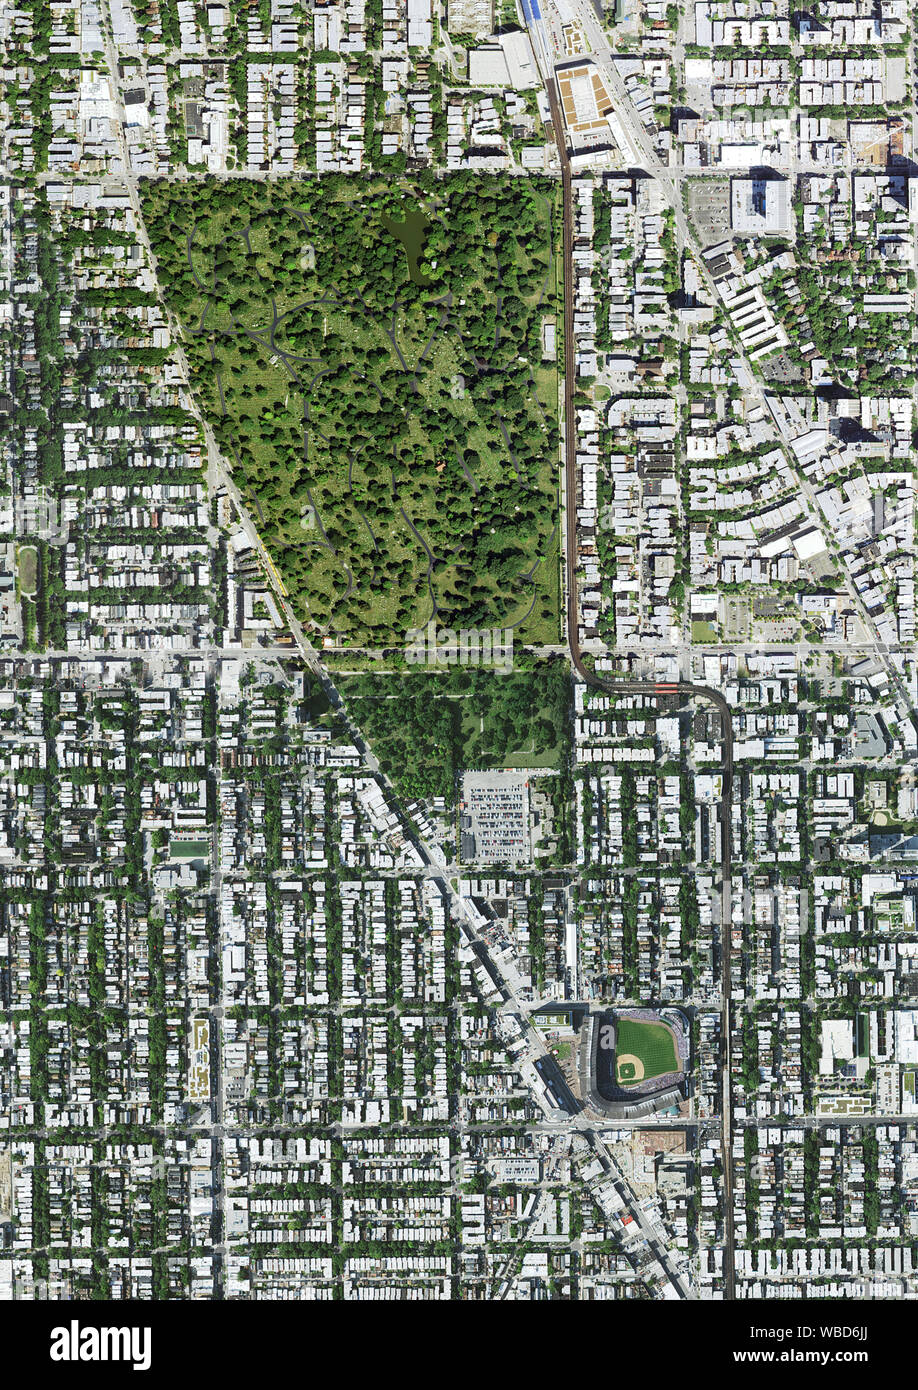 Aerial photography of Wrigley Field and Graceland Cemetery, Chicago, Illinois, USA. Image collected on September 3, 2017. Stock Photo